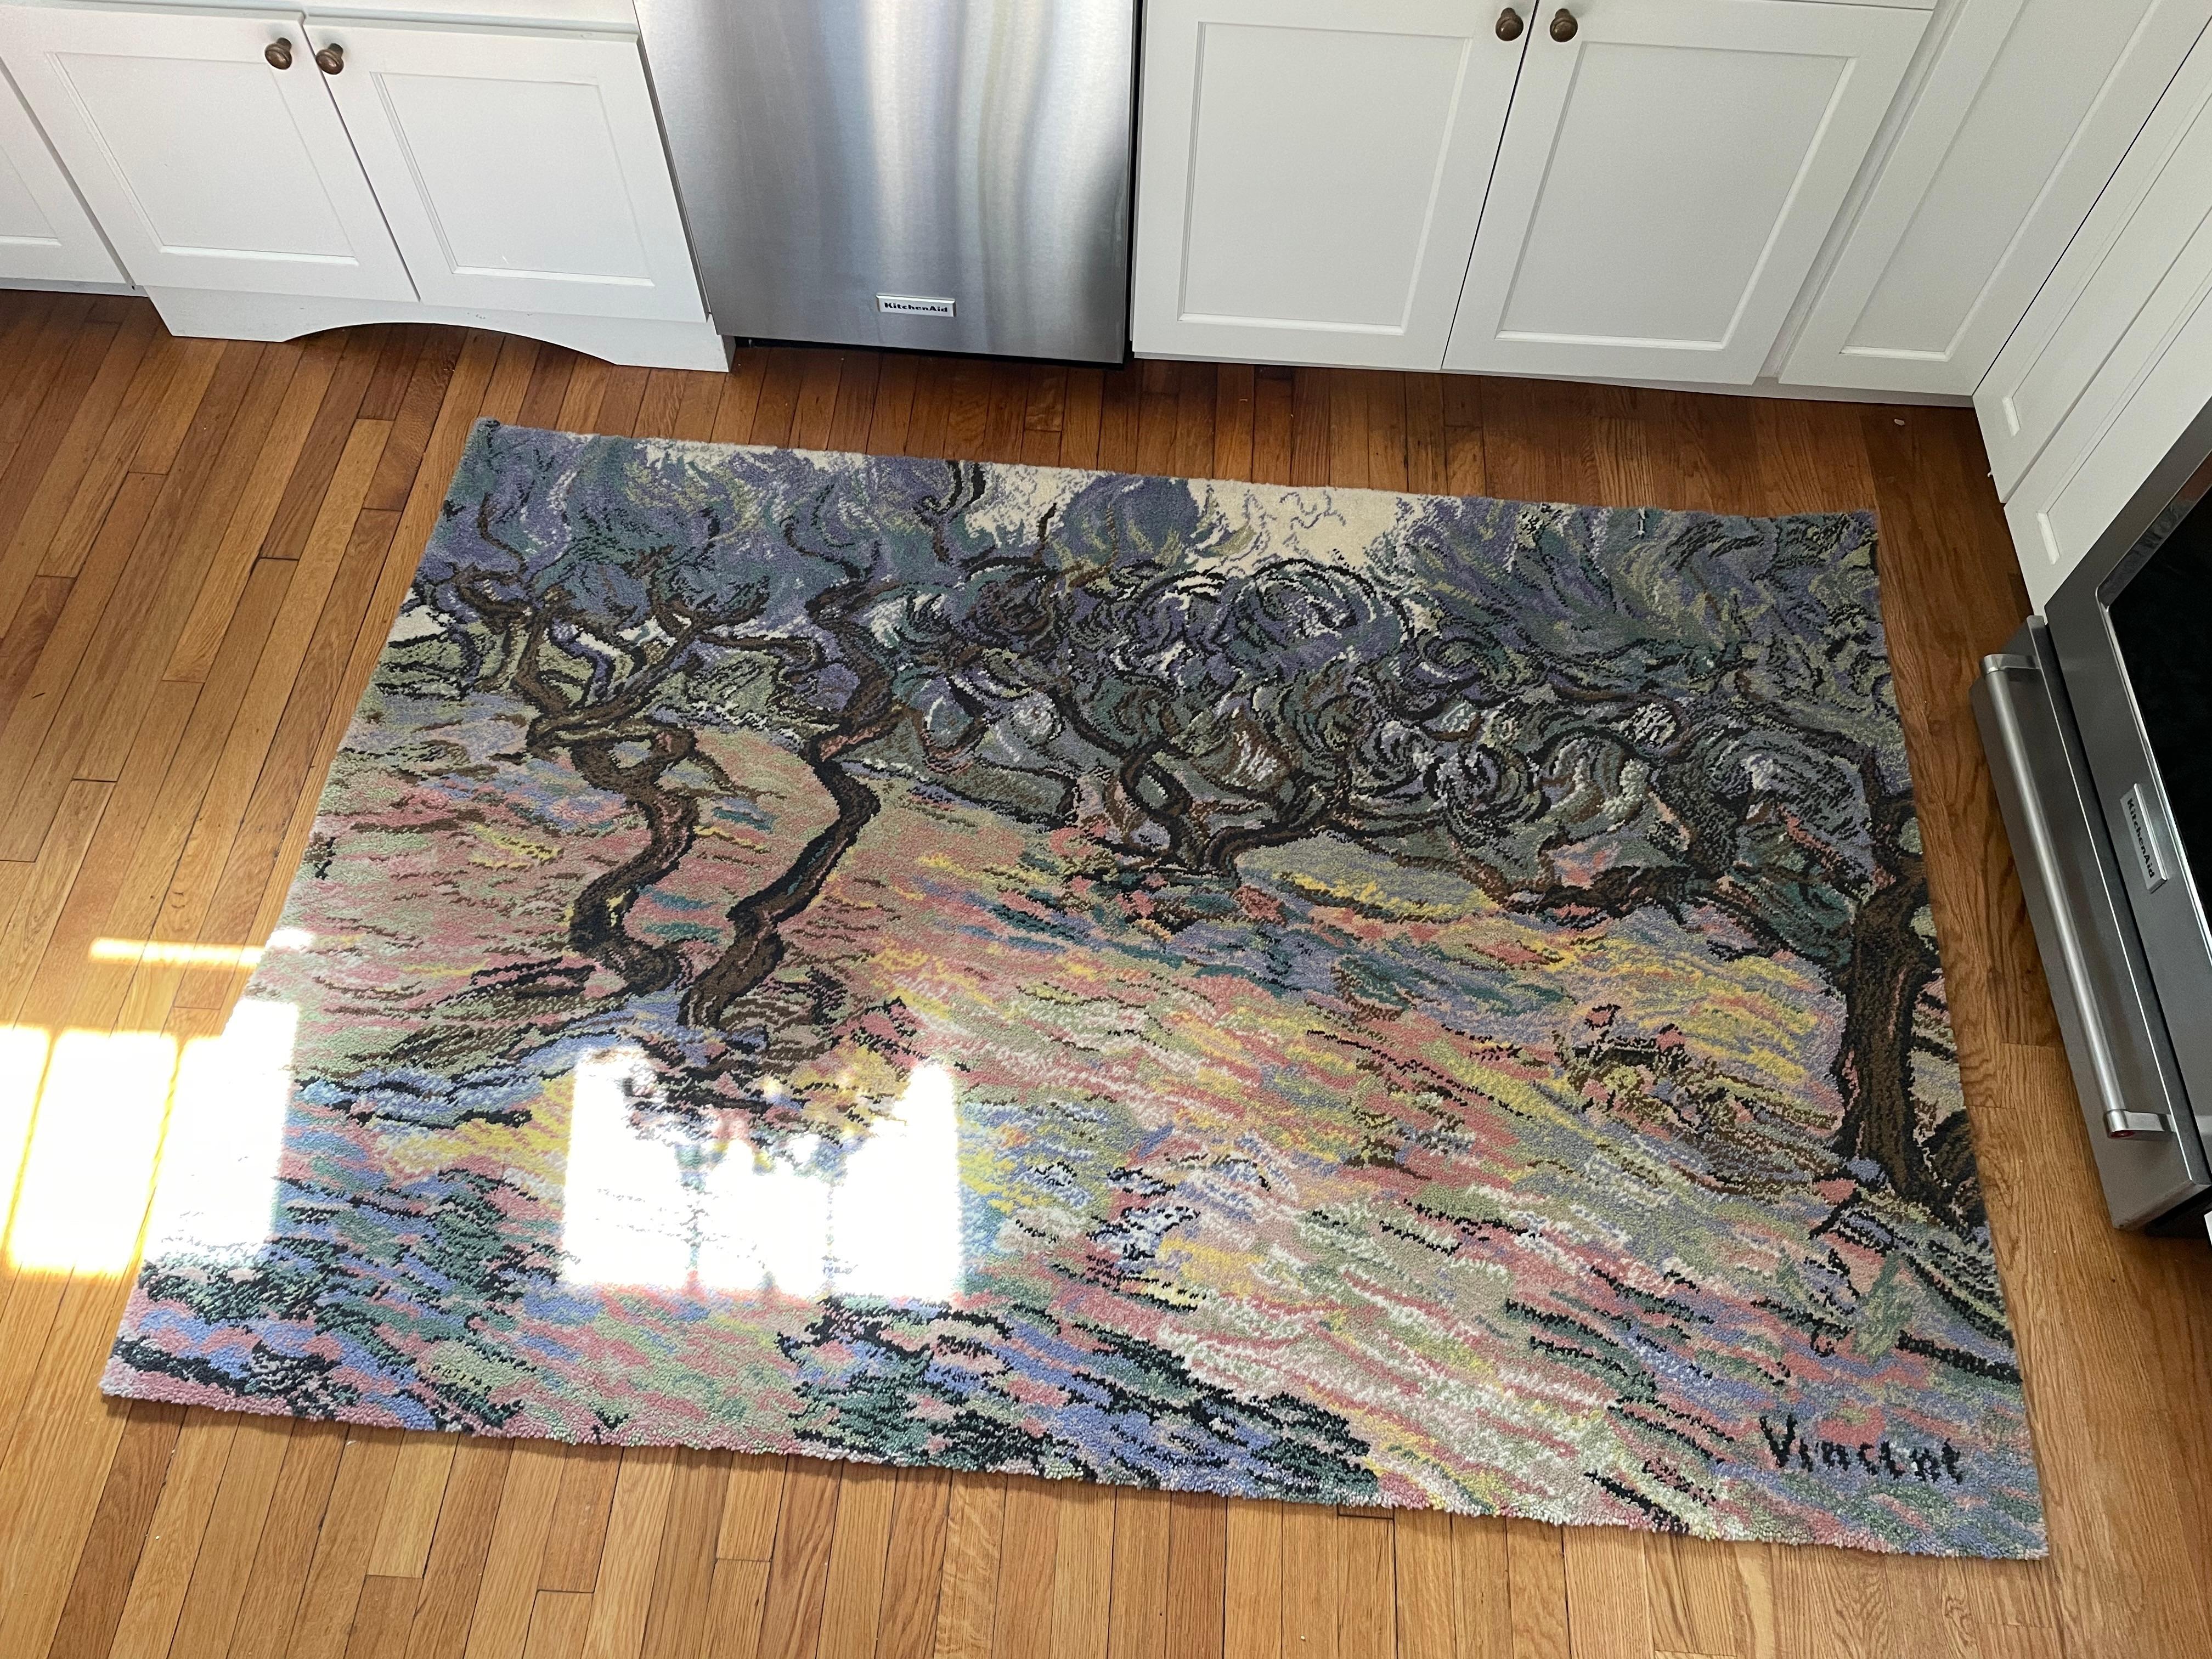 Beautiful and rare EGE Art Line rug. Vincent Van Gogh Olive Trees. Design No. 80583, no. 77
1995.
Made in Denmark.
Currently set up as a tapestry but could easily take off for floor use. Rug was out of an estate where is was hanging on the